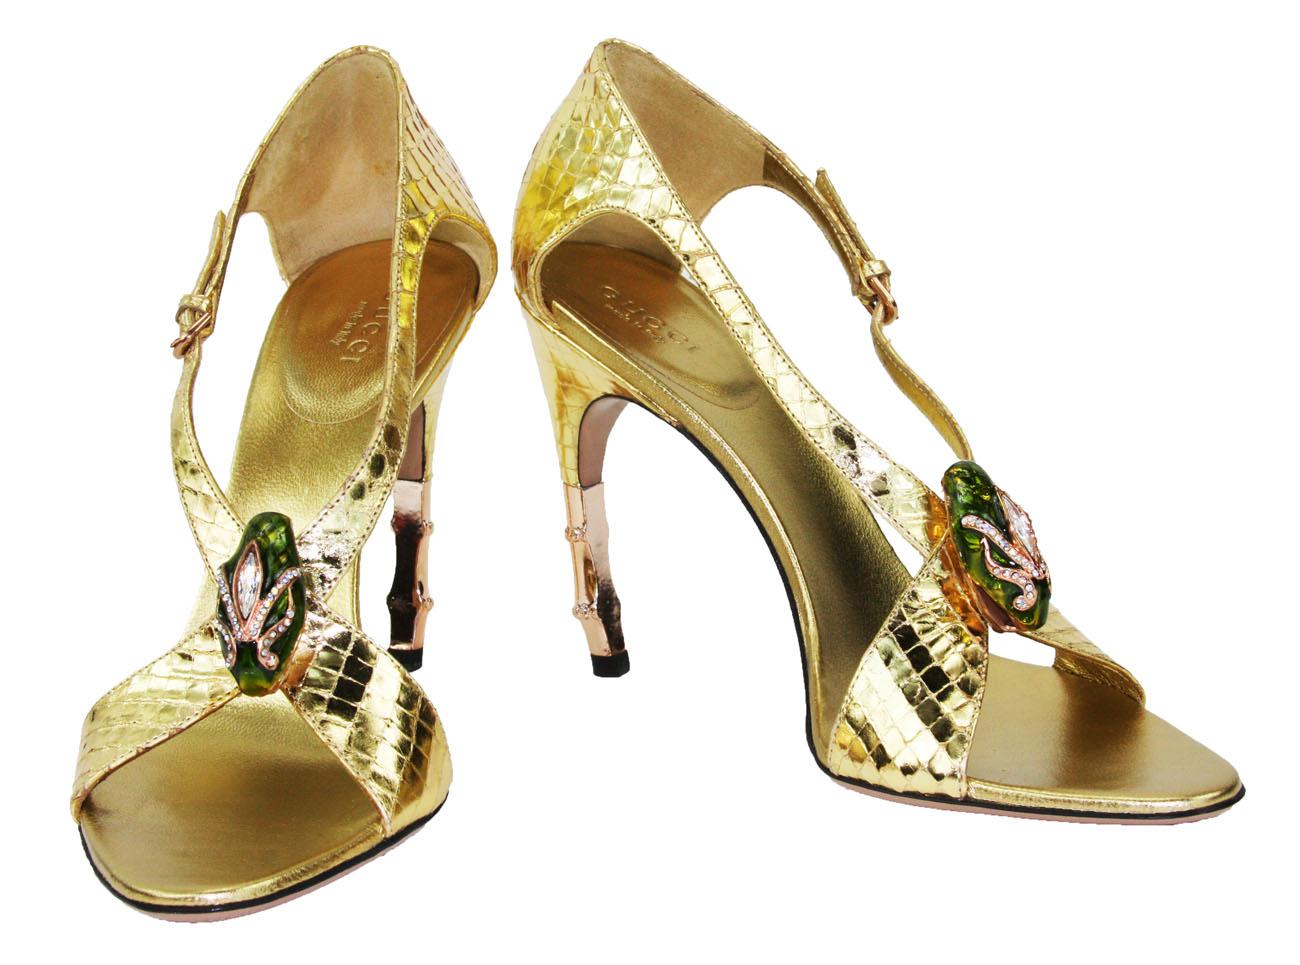 New Tom Ford for Gucci S/S 2004 Gold Python Jeweled Bamboo Heel Shoes 8.5 - 38.5 1